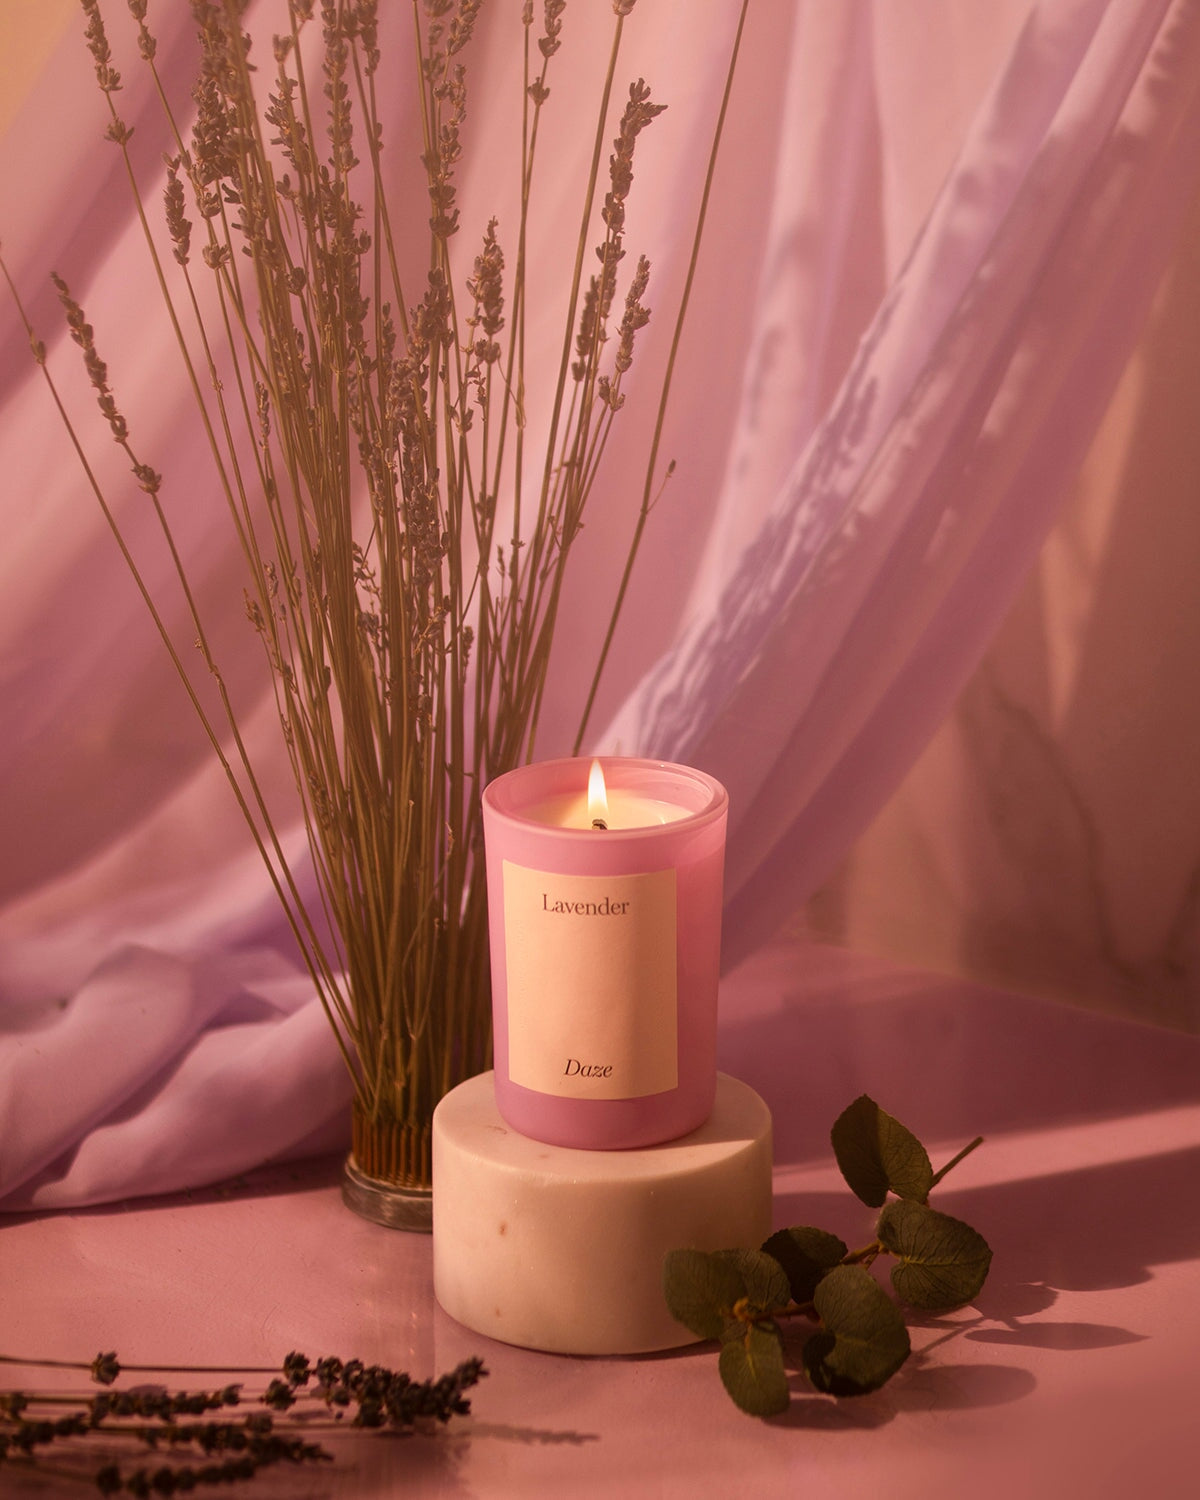 Limited Edition Lavender Daze Candle Limited Edition Brooklyn Candle Studio 